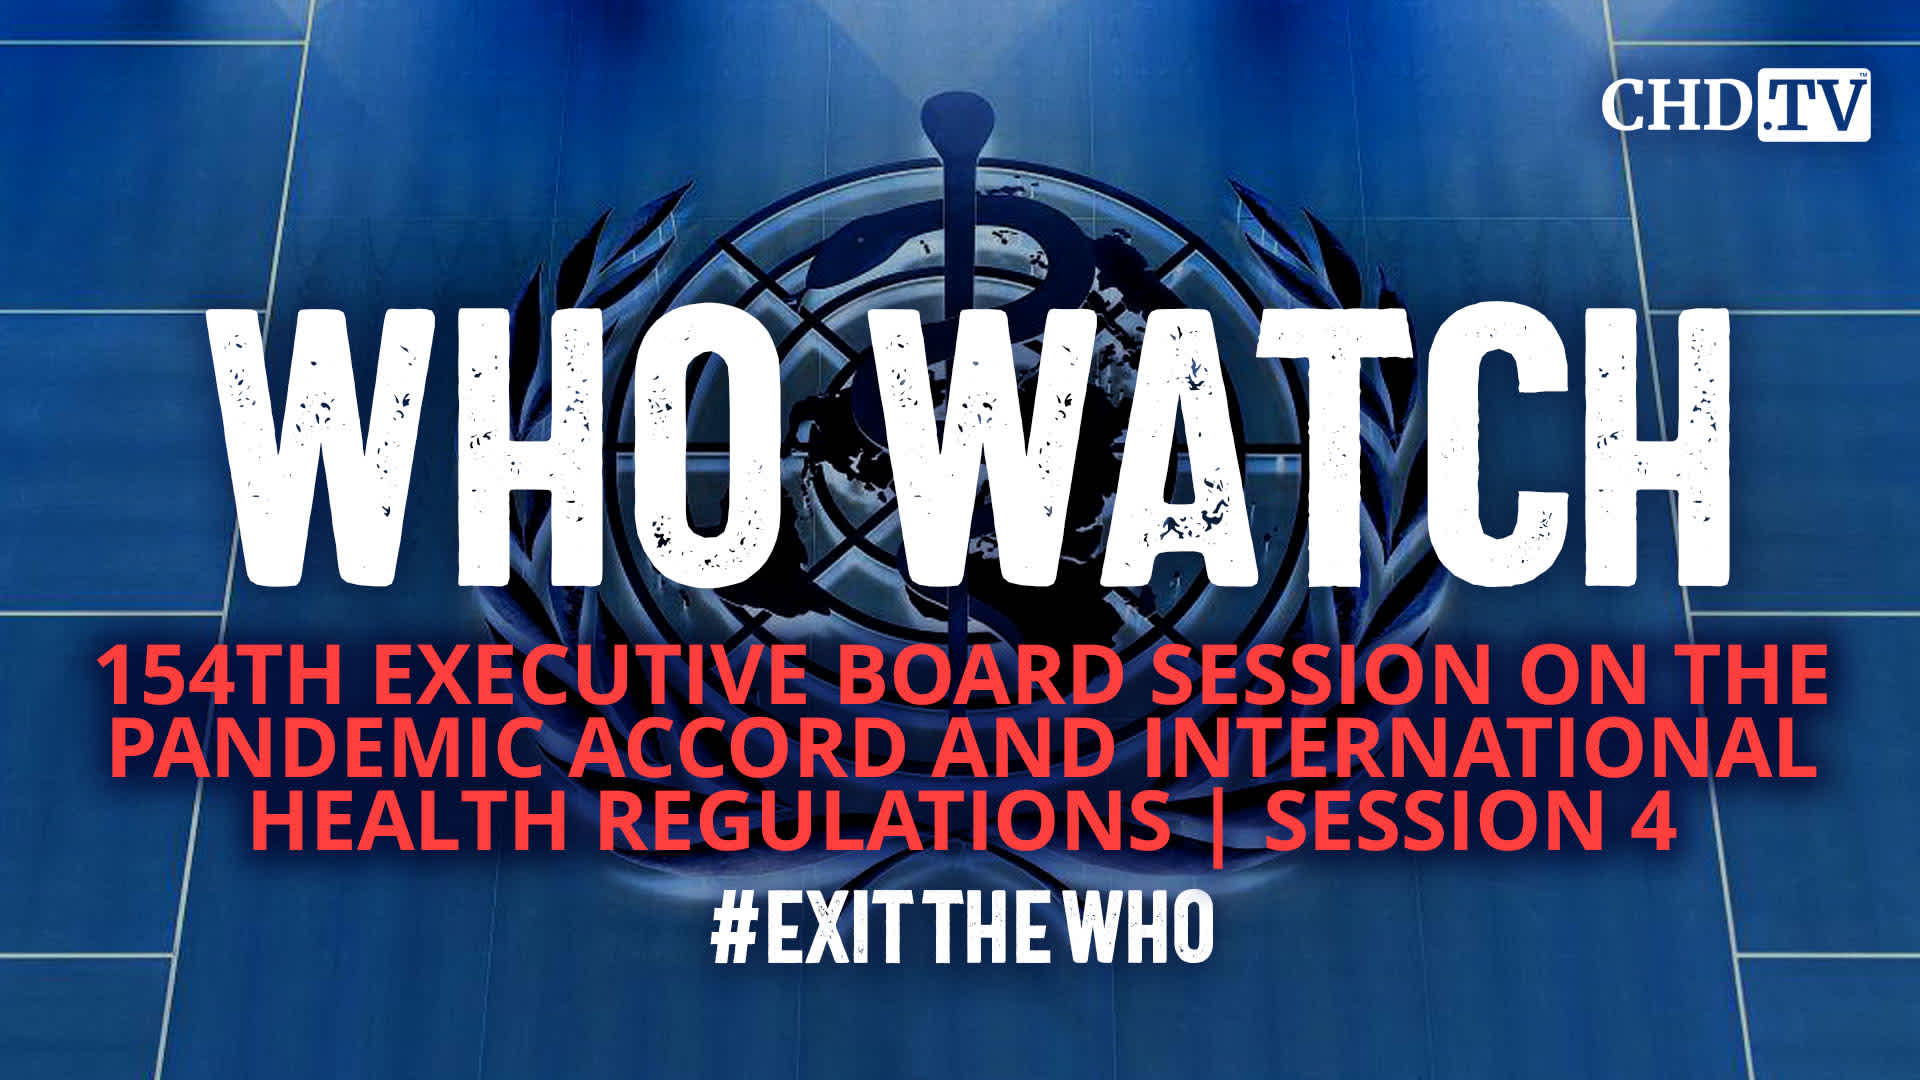 WHO WATCH: 154th Executive Board Session on the Pandemic Accord and International Health Regulations | Session 4